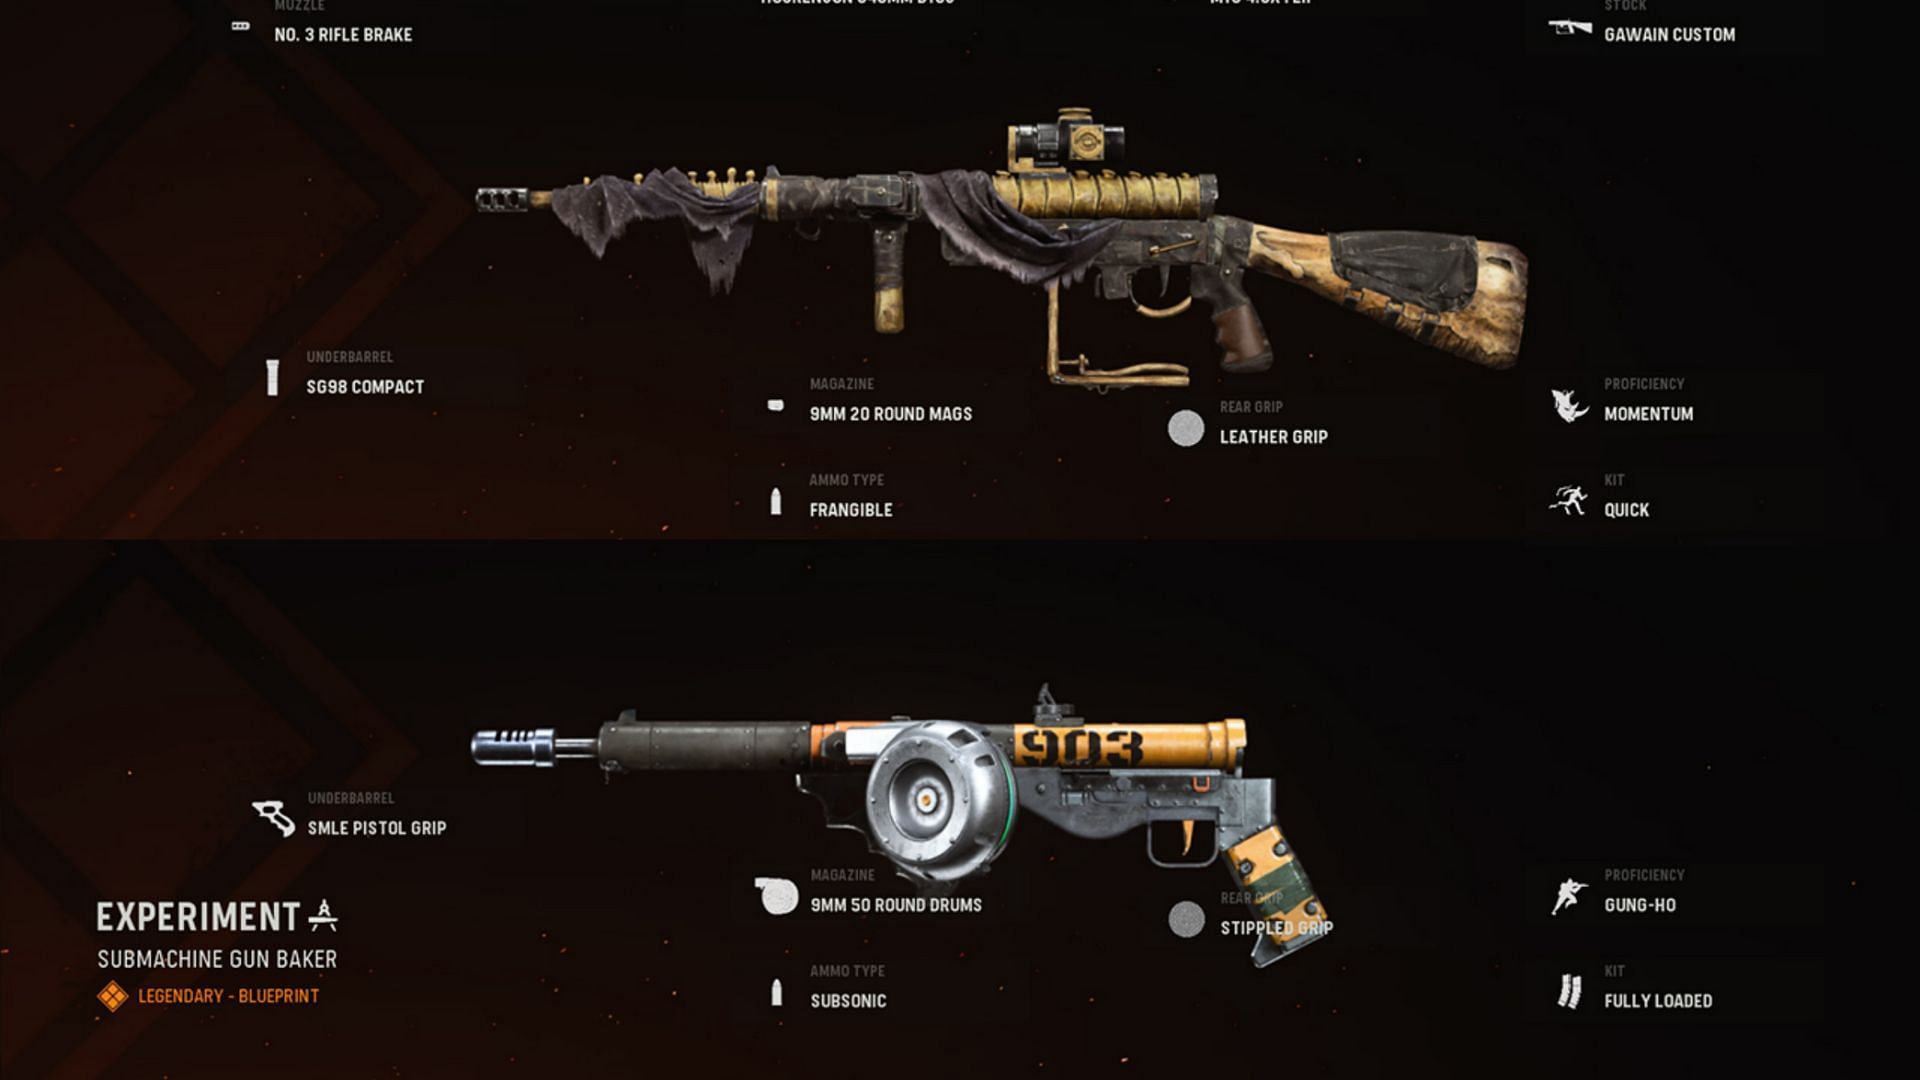 Some available blueprints for the Sten SMG in-game (Image via  Warzone/Activision)